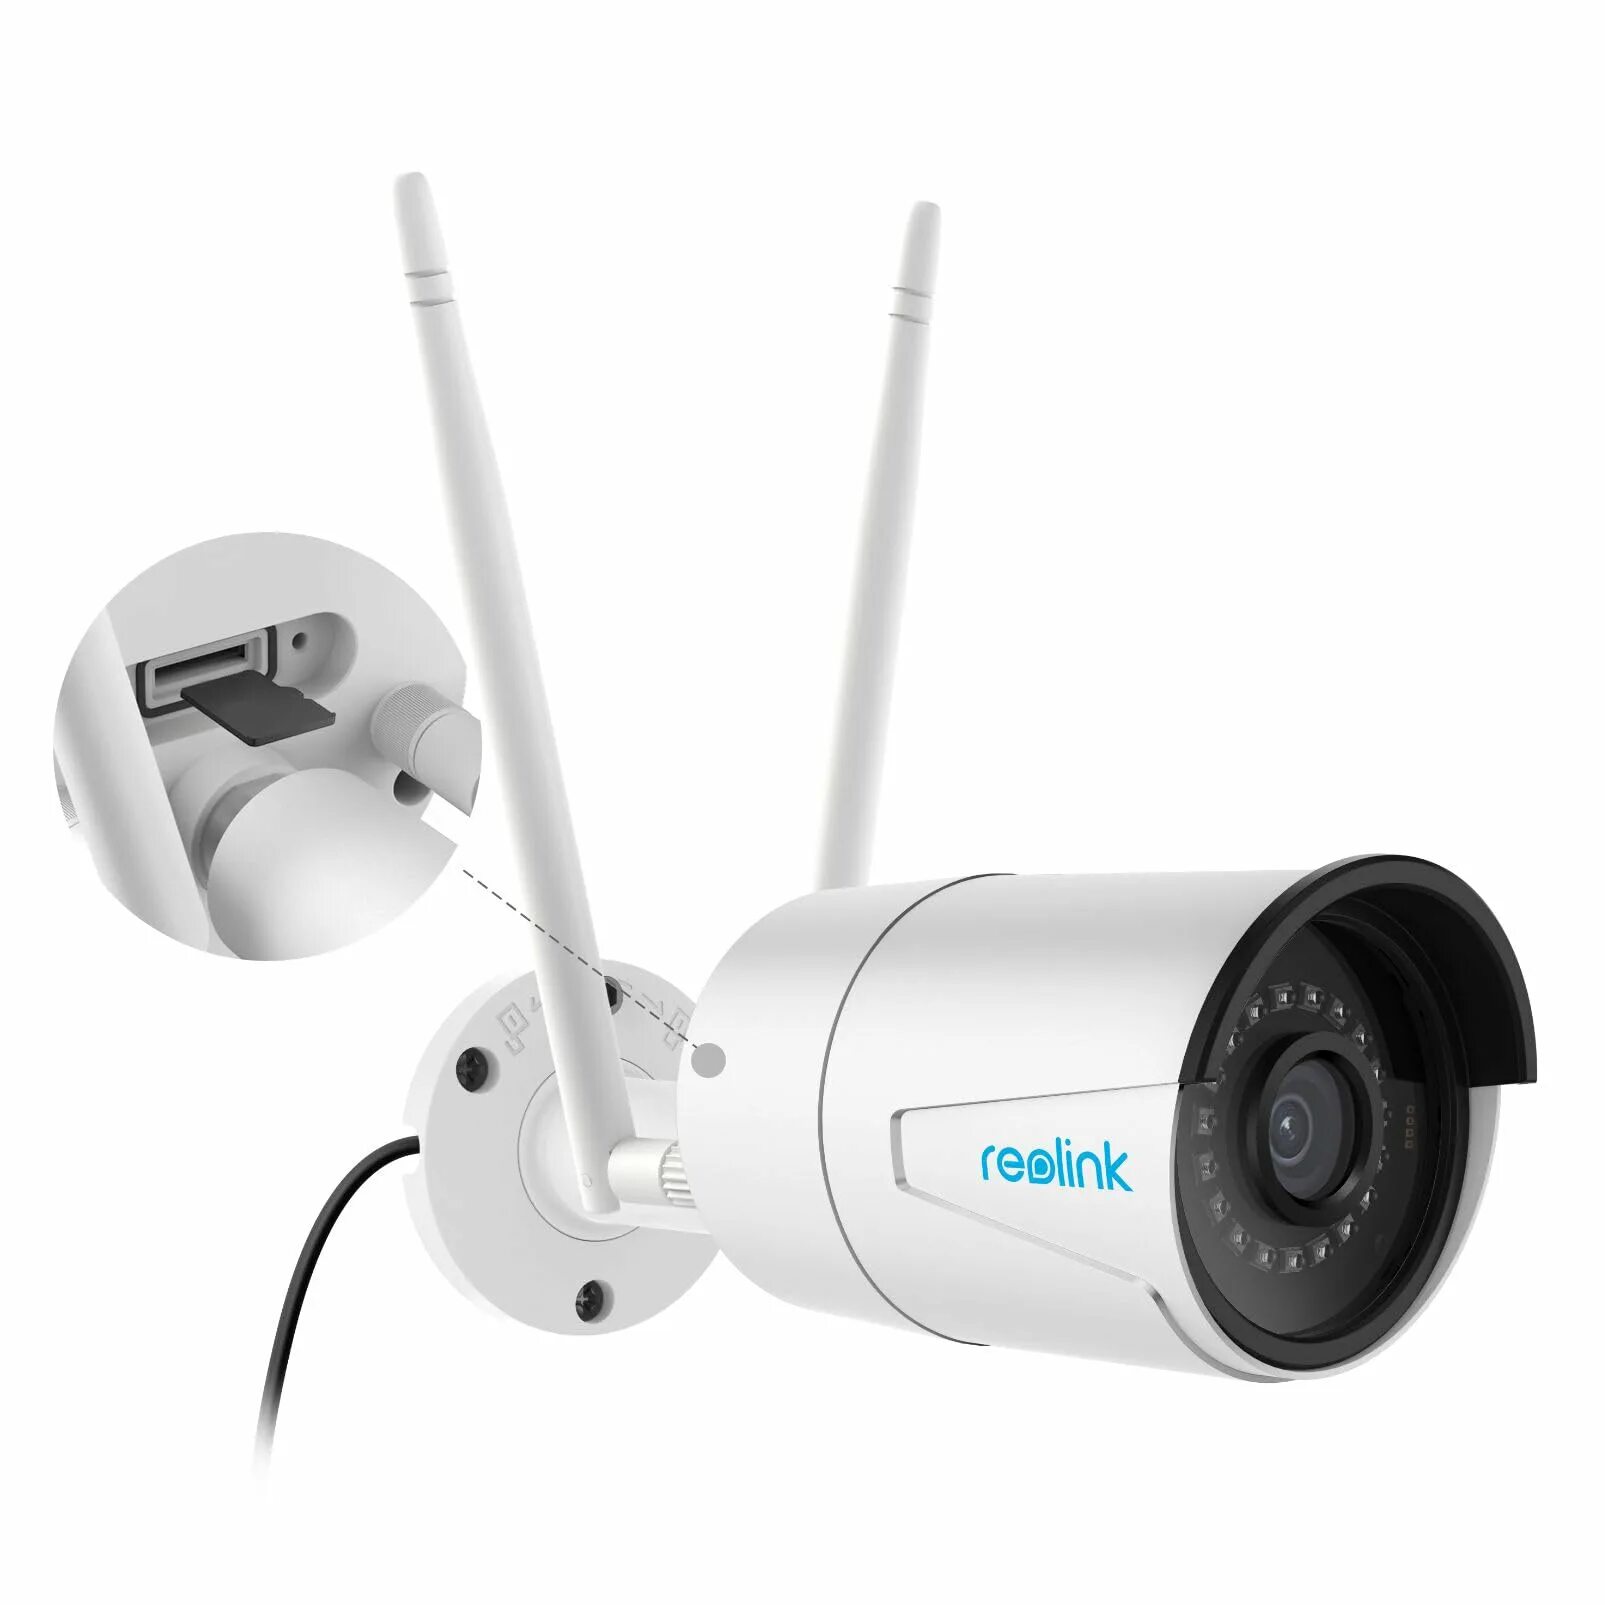 Wifi cam. Reolink RLC-410w. Камера Reolink RLC-410-5mp. Реолинк камера RLC-410w. Reolink Wi-Fi камера.